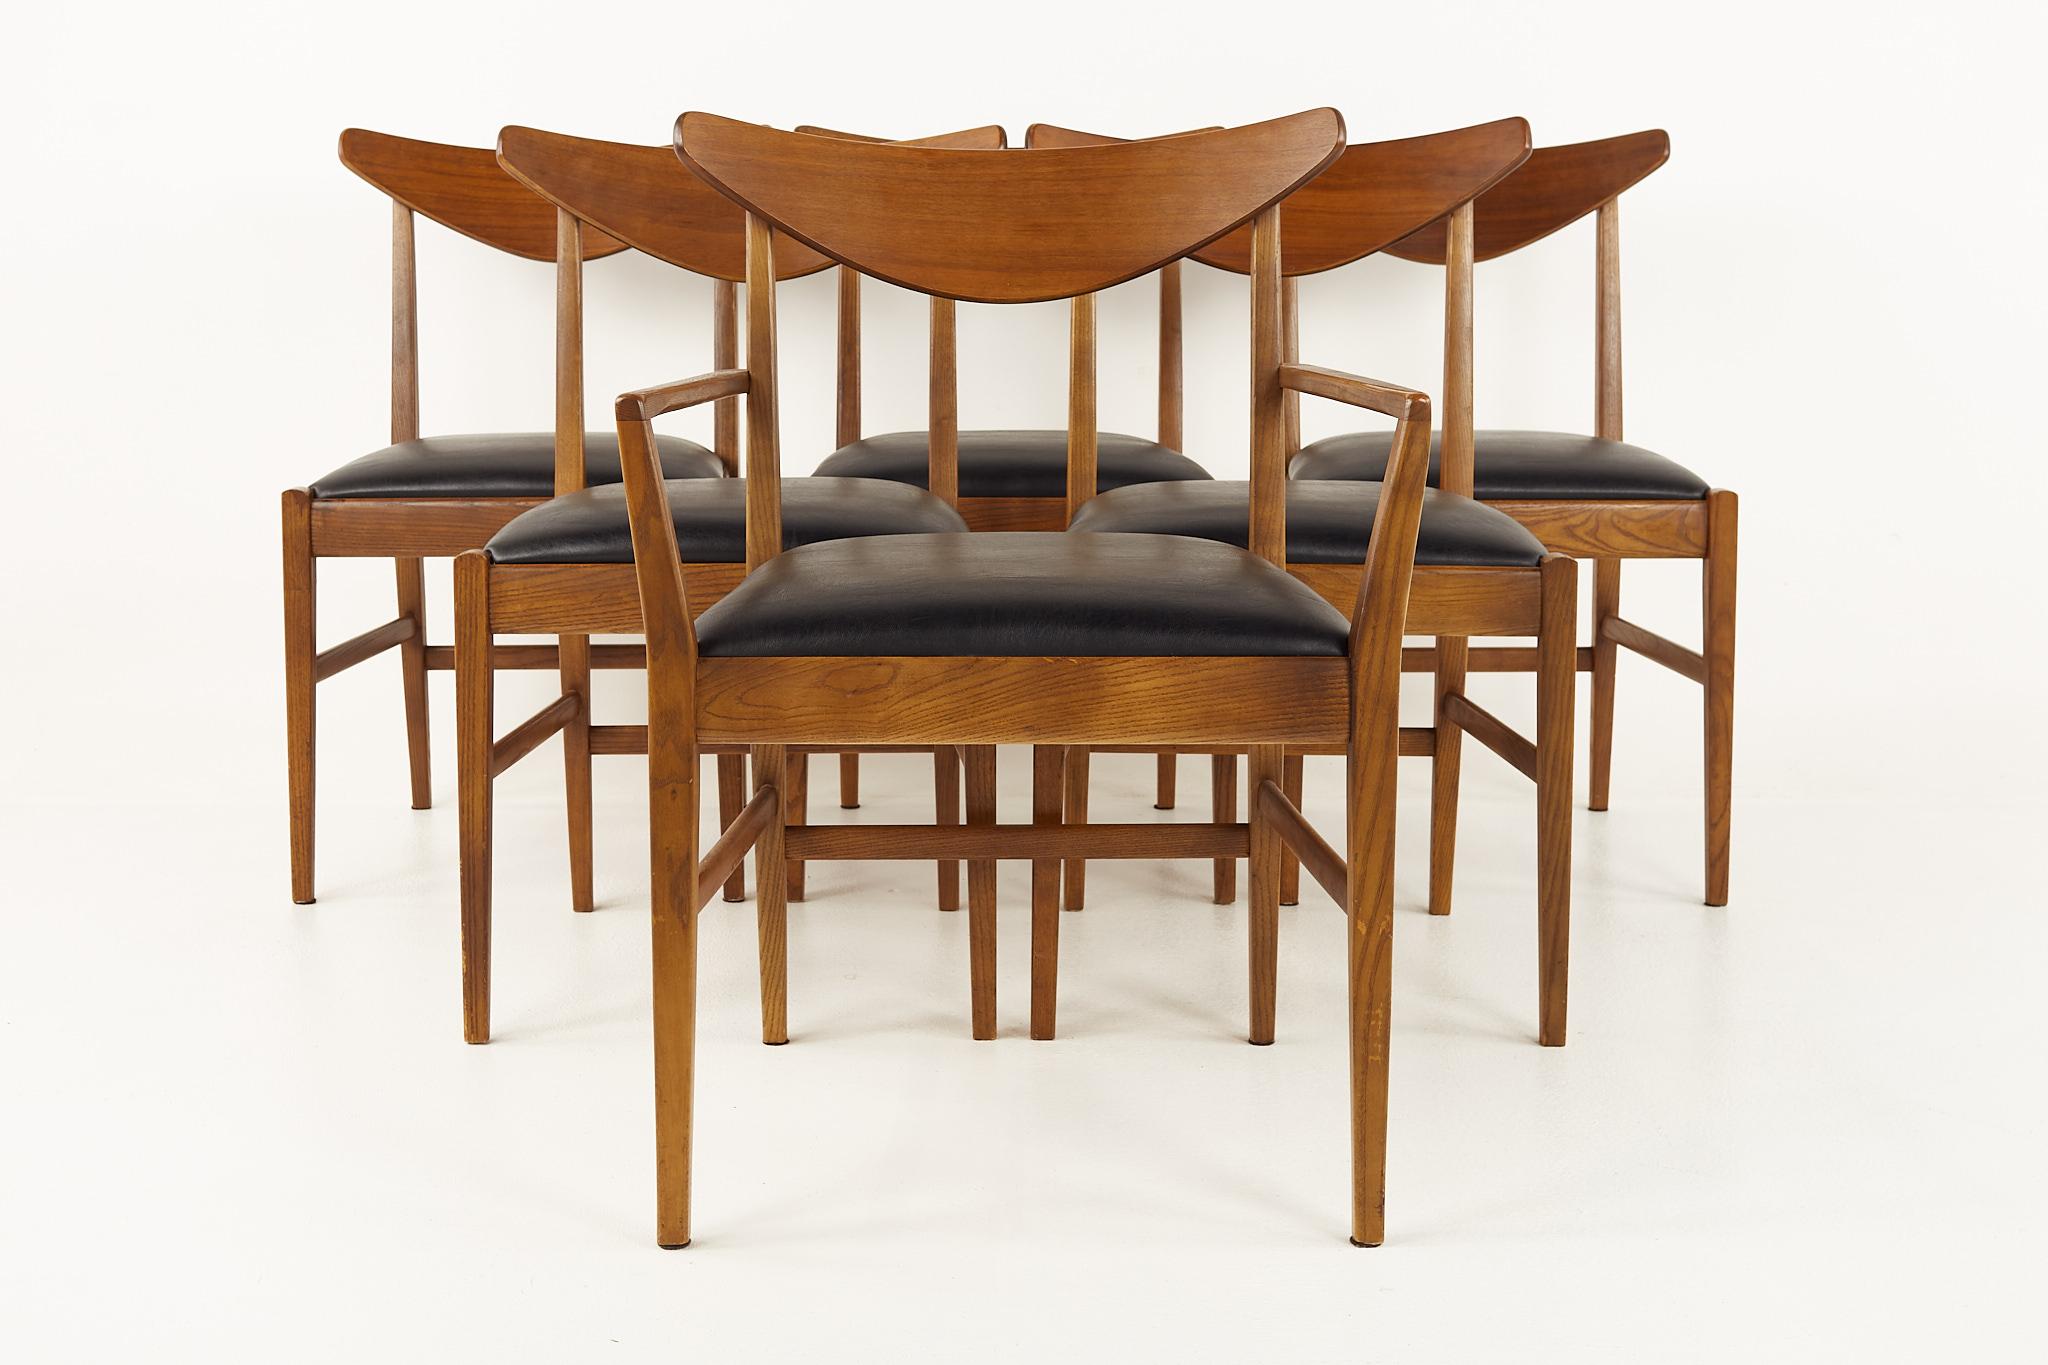 Stanley mid century walnut cats eye dining chairs - set of 6

Each chair measures: 19 wide x 17 deep x 33 inches high, with a seat height of 19 and arm height of 24 inches

All pieces of furniture can be had in what we call restored vintage